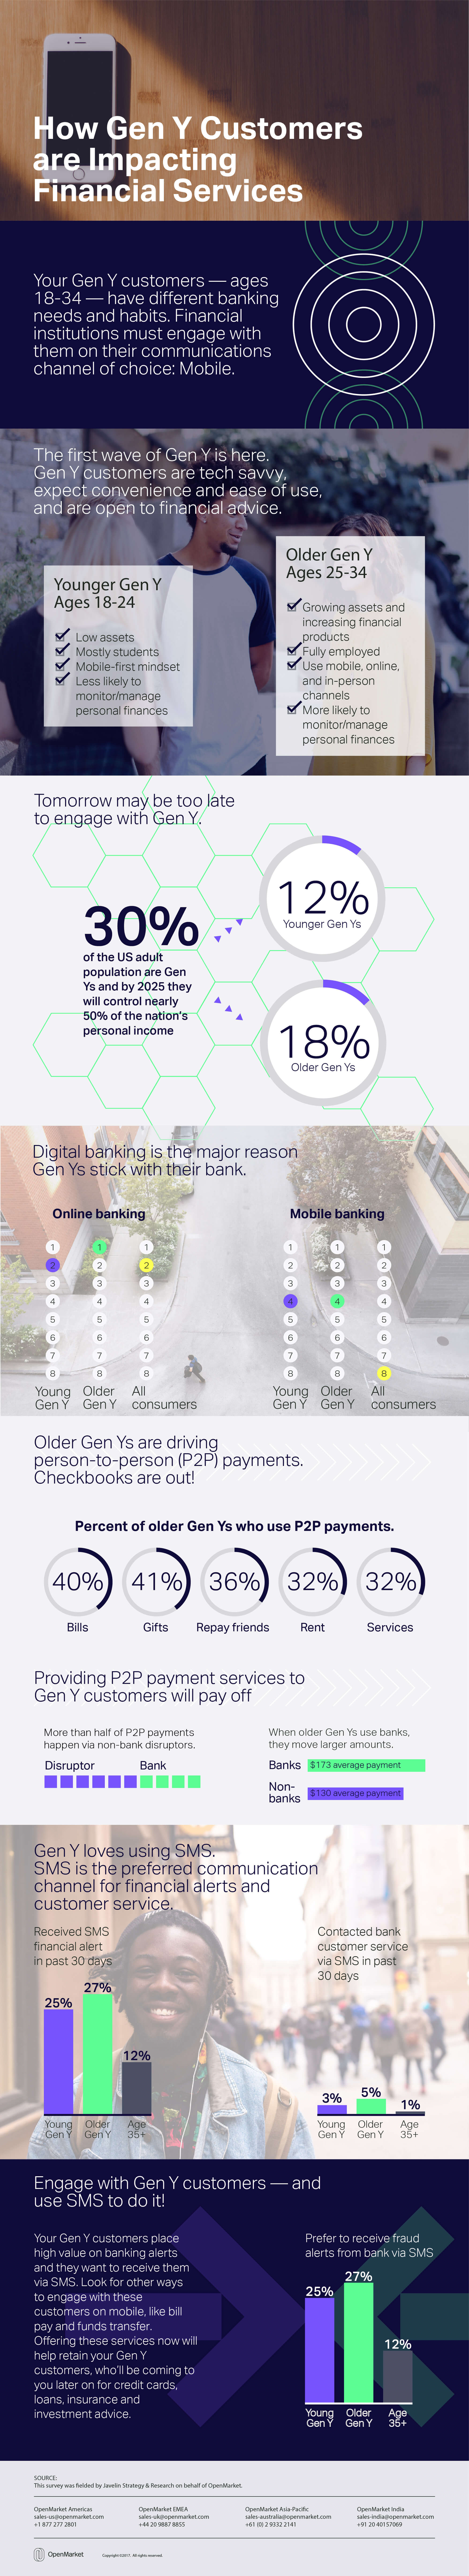 How Gen Y is Impacting Financial Services Today infographic